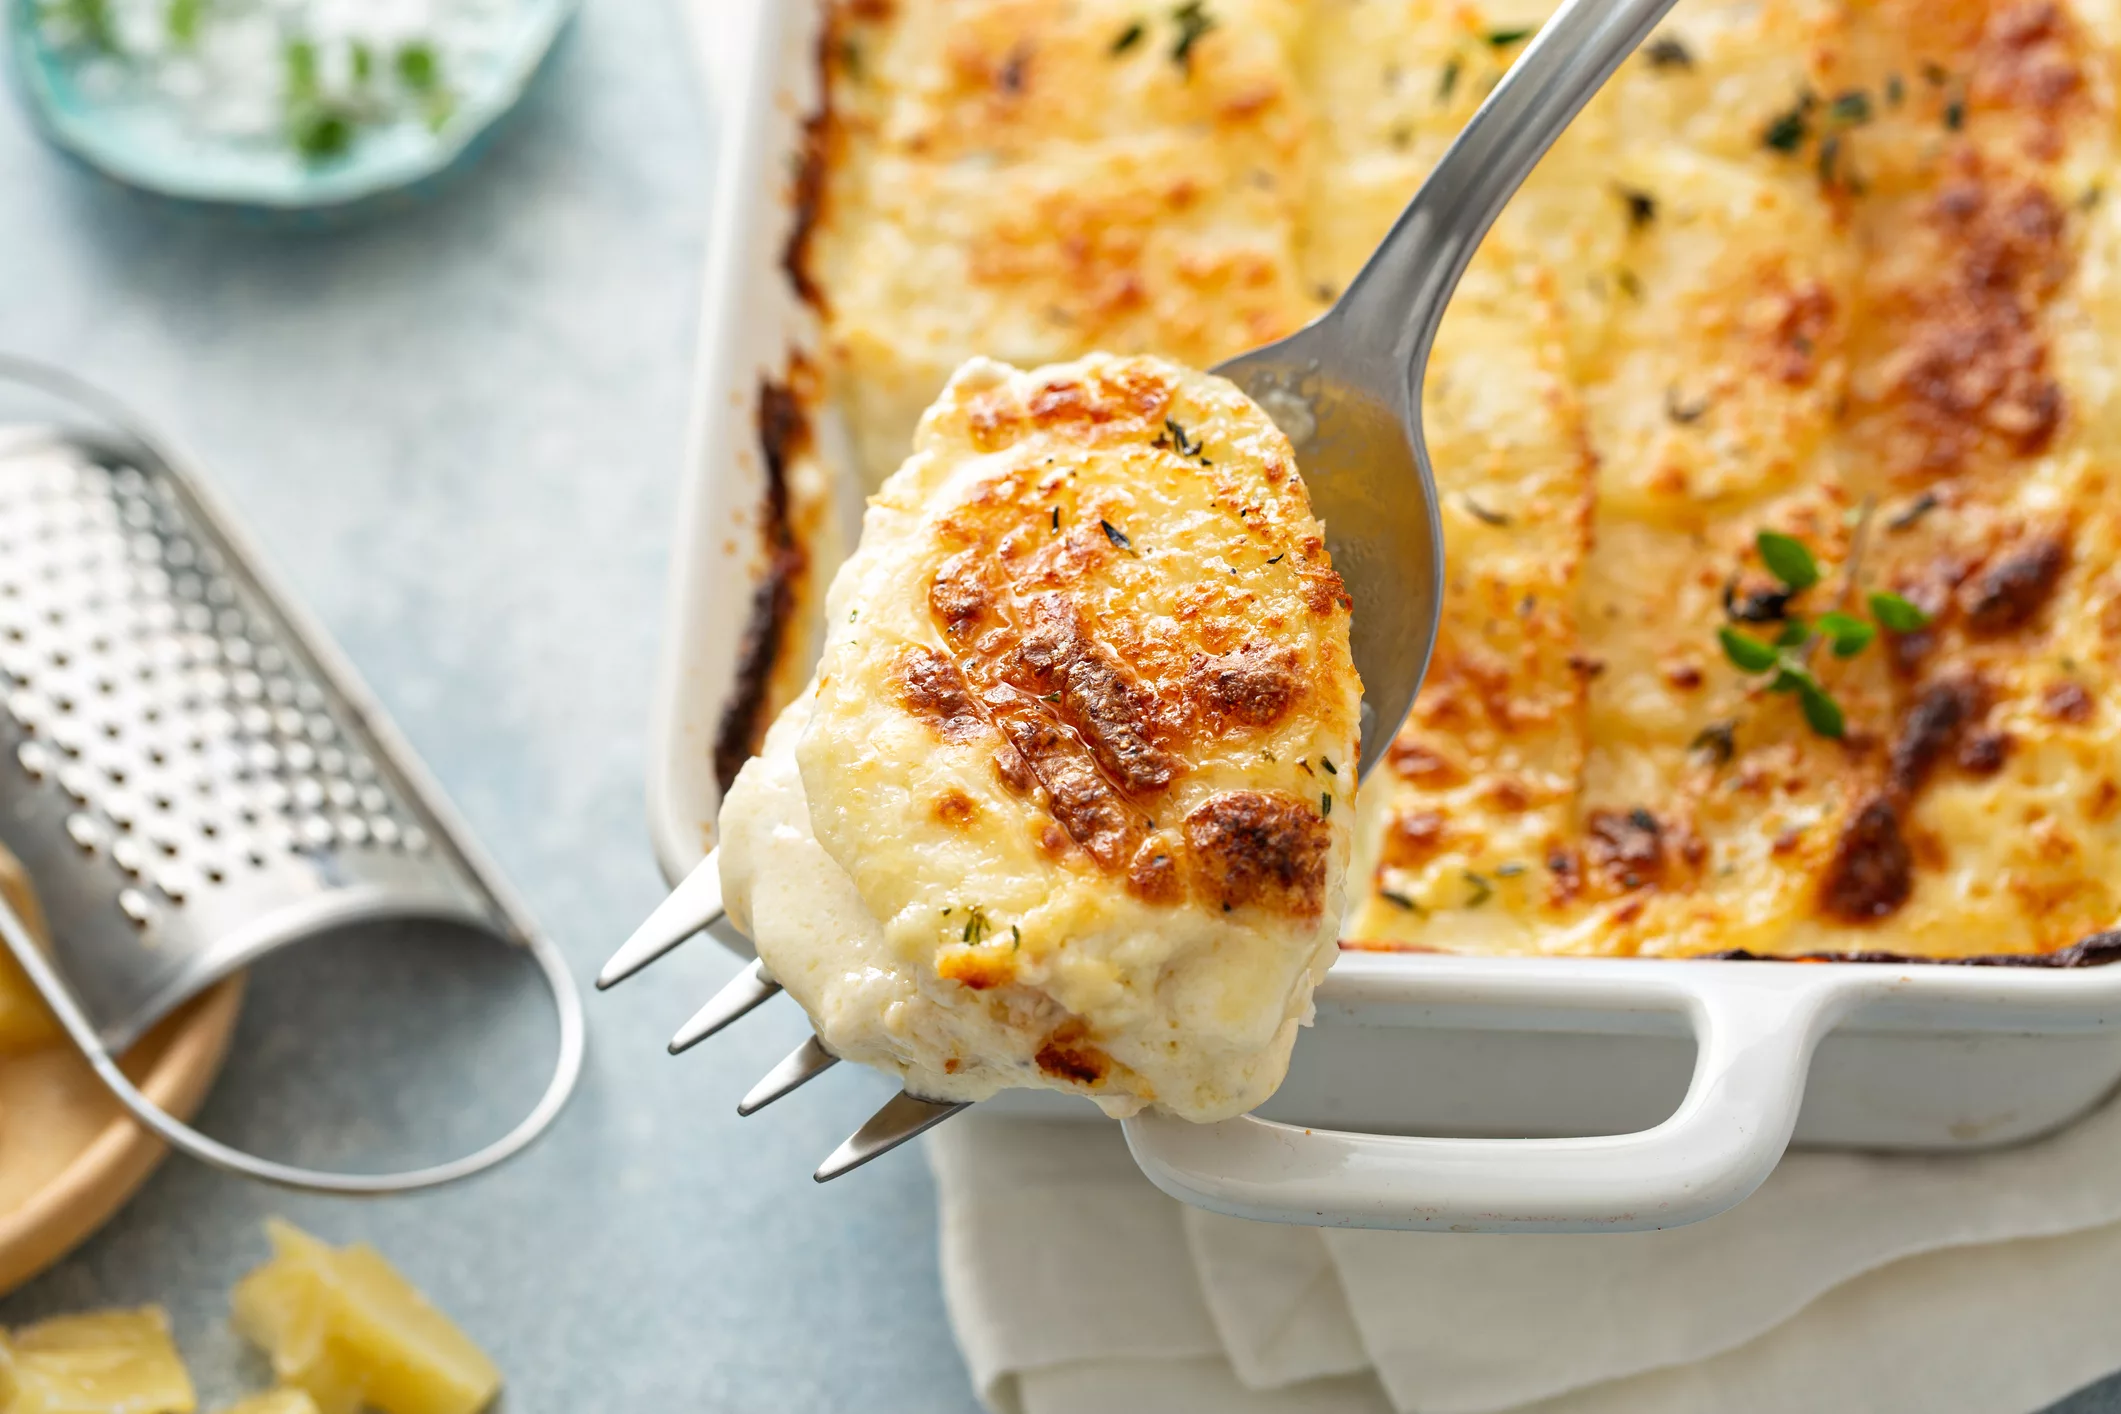 Old Time Scalloped Potatoes